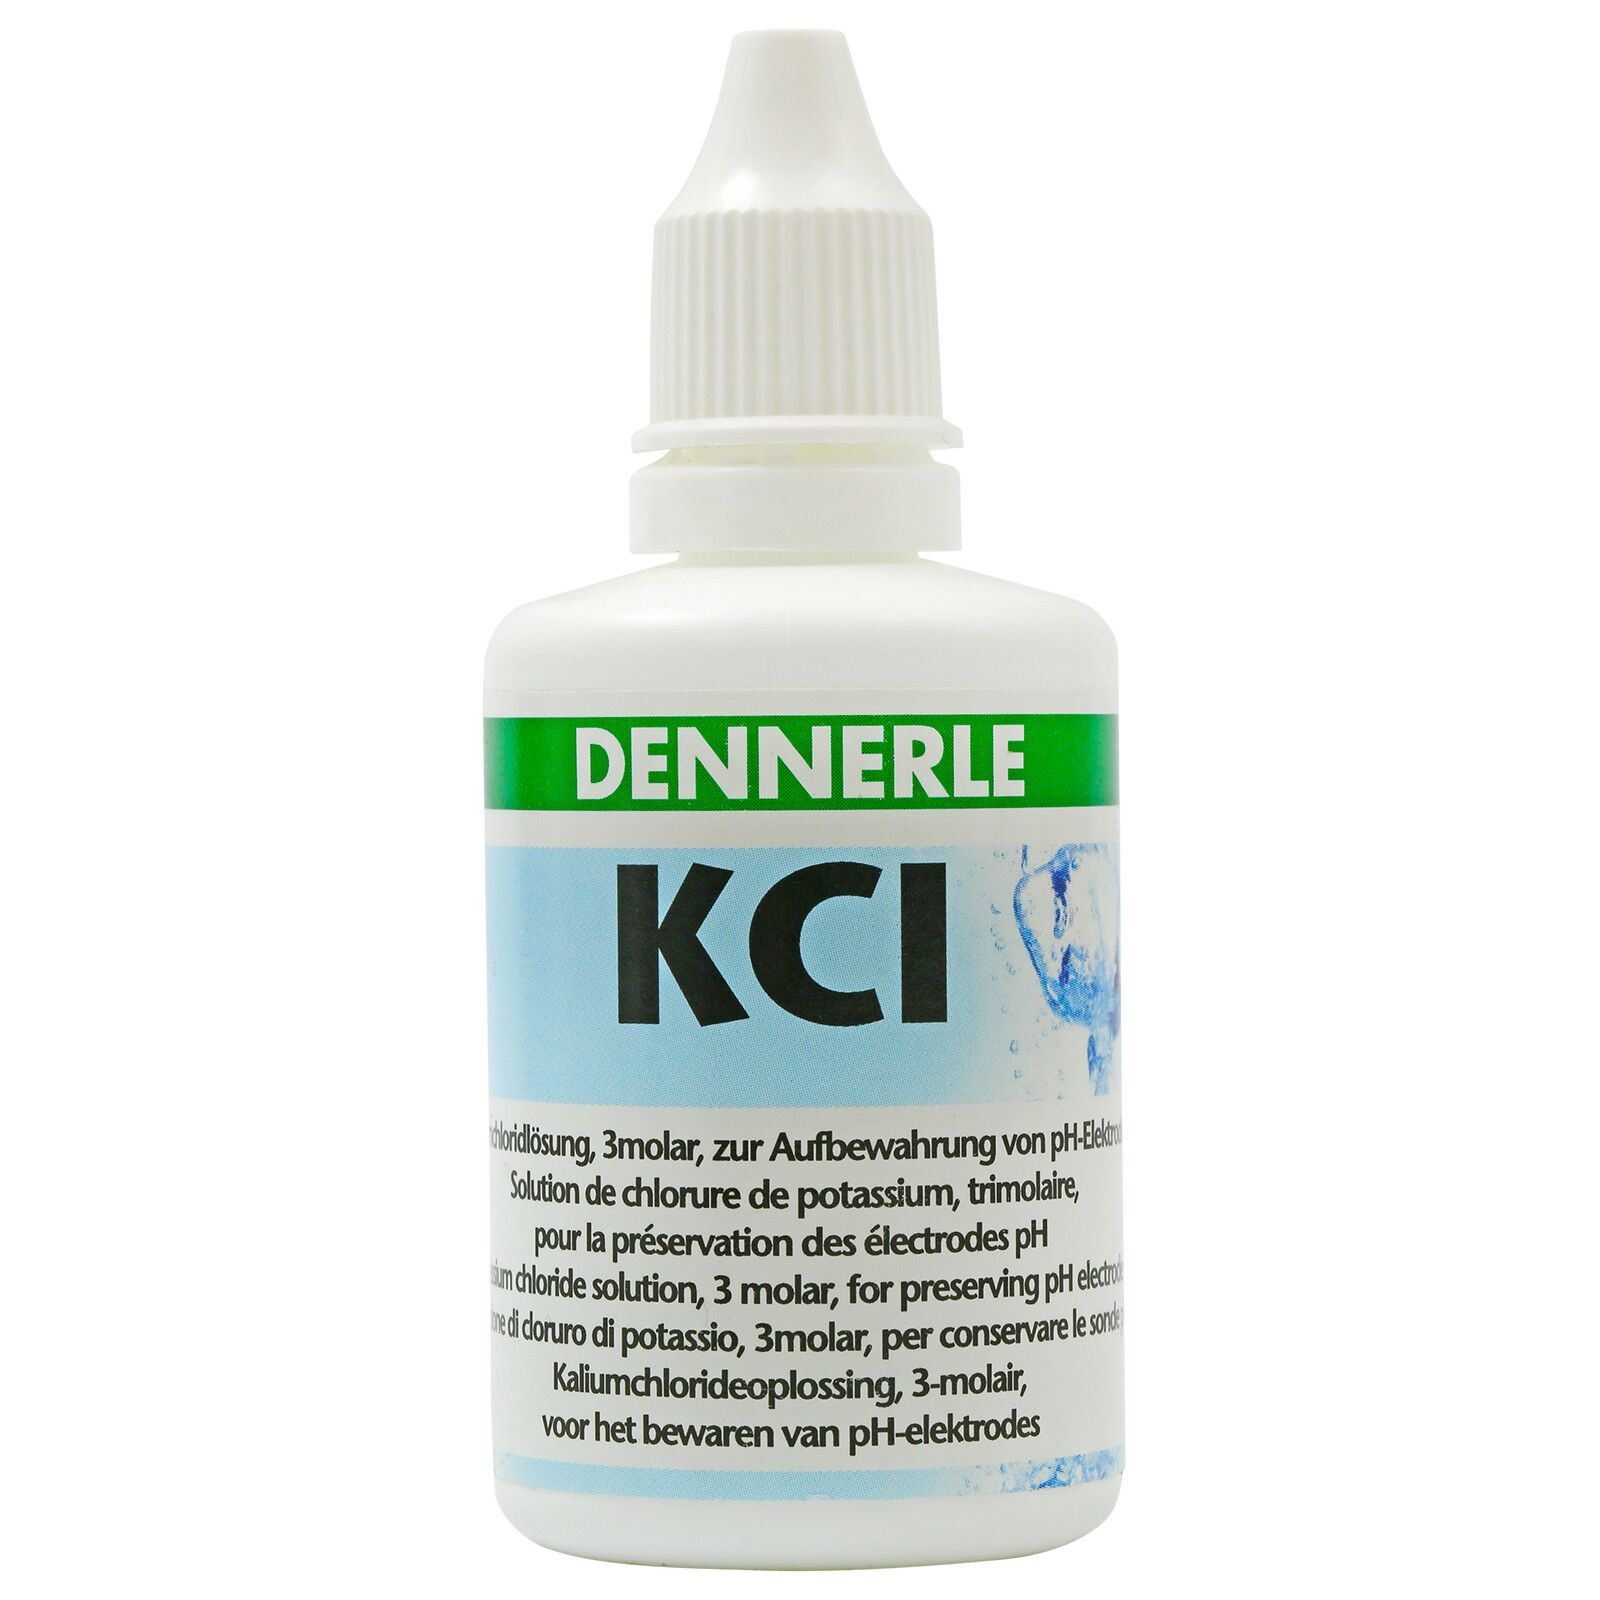 Dennerle - KCL Solution